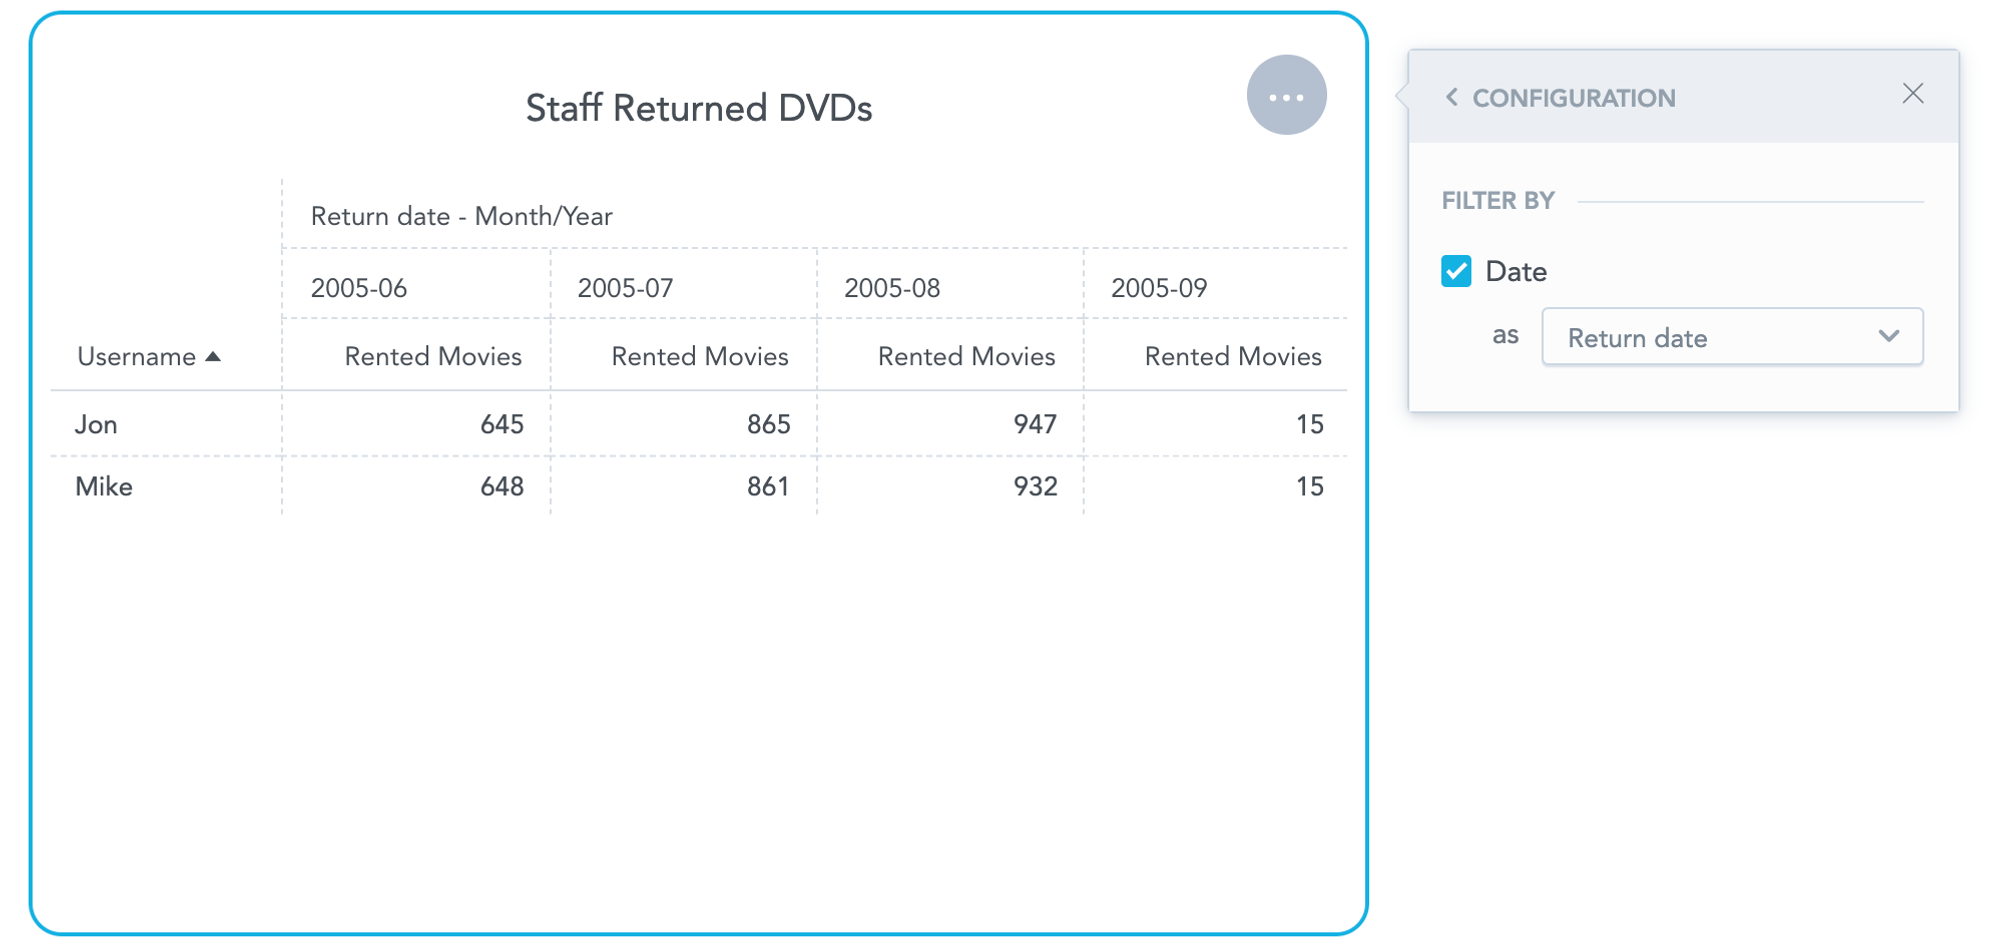 A second report that demonstrates how many DVD returns occurred per month